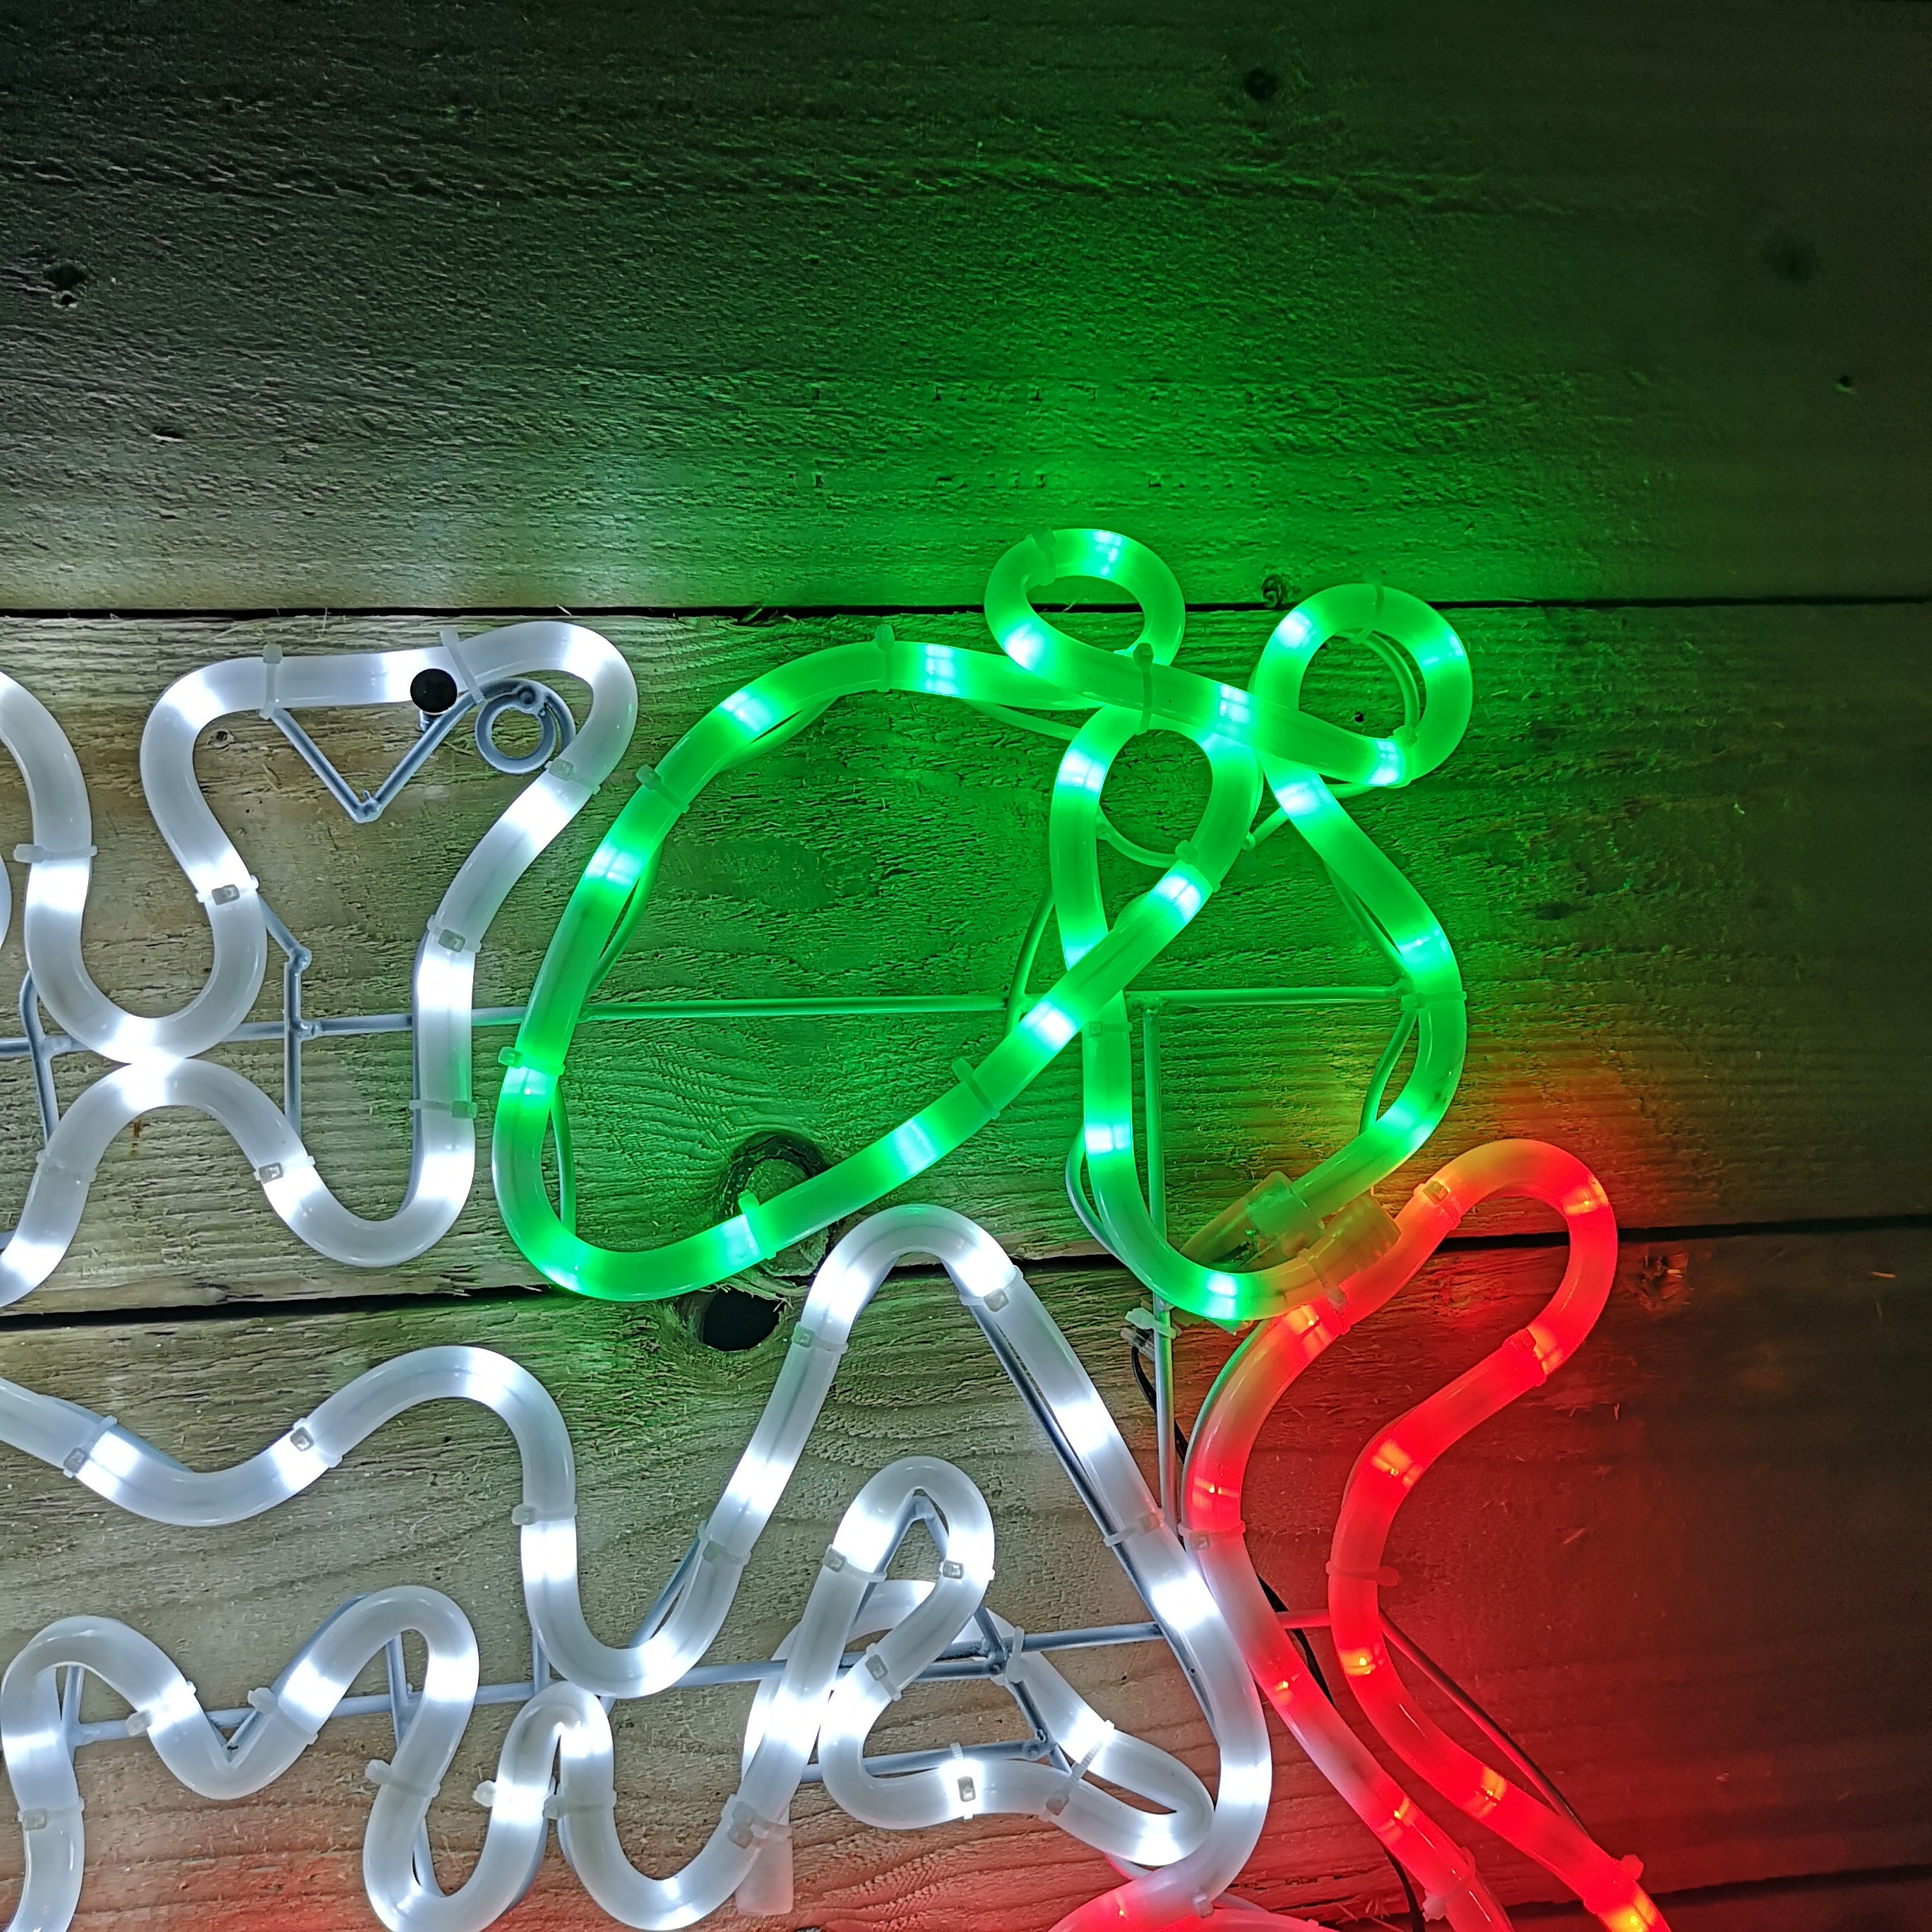 102 x 44cm Merry Christmas Red & White Rope Light Silhouette with Flashing Green Holly Leaves